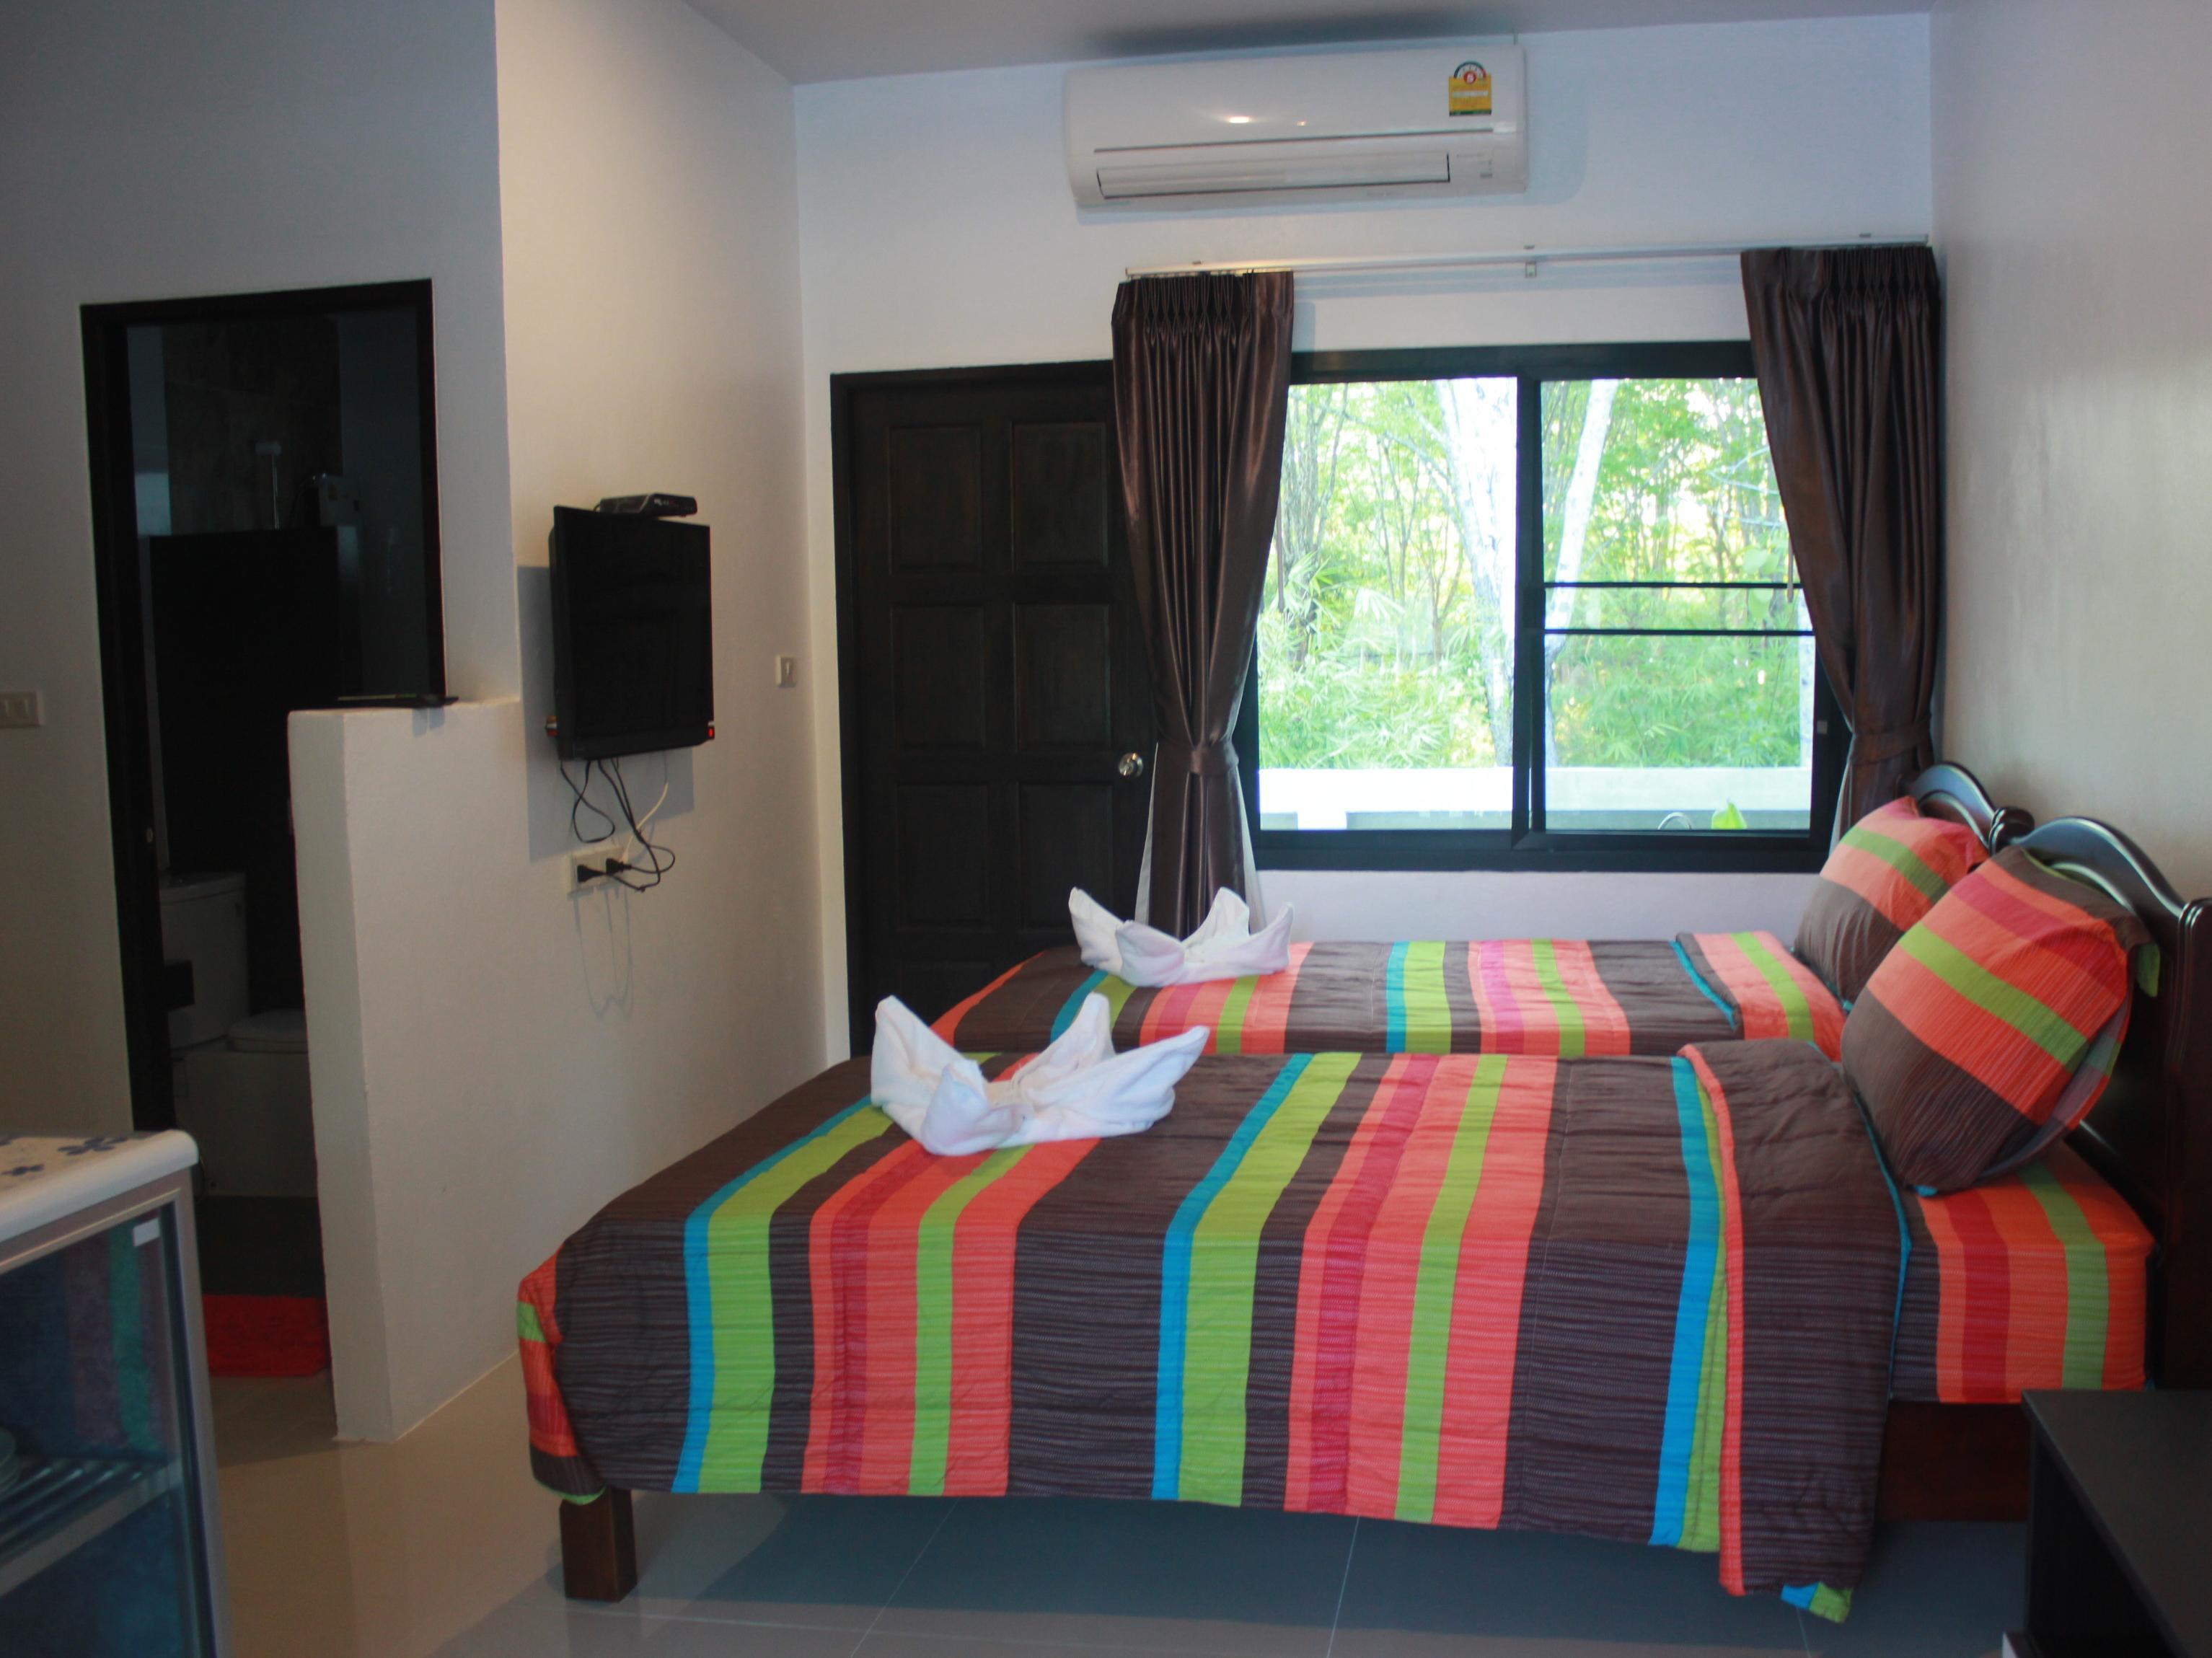 Oscar Villa Aonang Krabi Thailand FAQ 2016, What facilities are there in Oscar Villa Aonang Krabi Thailand 2016, What Languages Spoken are Supported in Oscar Villa Aonang Krabi Thailand 2016, Which payment cards are accepted in Oscar Villa Aonang Krabi Thailand , Thailand Oscar Villa Aonang Krabi room facilities and services Q&A 2016, Thailand Oscar Villa Aonang Krabi online booking services 2016, Thailand Oscar Villa Aonang Krabi address 2016, Thailand Oscar Villa Aonang Krabi telephone number 2016,Thailand Oscar Villa Aonang Krabi map 2016, Thailand Oscar Villa Aonang Krabi traffic guide 2016, how to go Thailand Oscar Villa Aonang Krabi, Thailand Oscar Villa Aonang Krabi booking online 2016, Thailand Oscar Villa Aonang Krabi room types 2016.